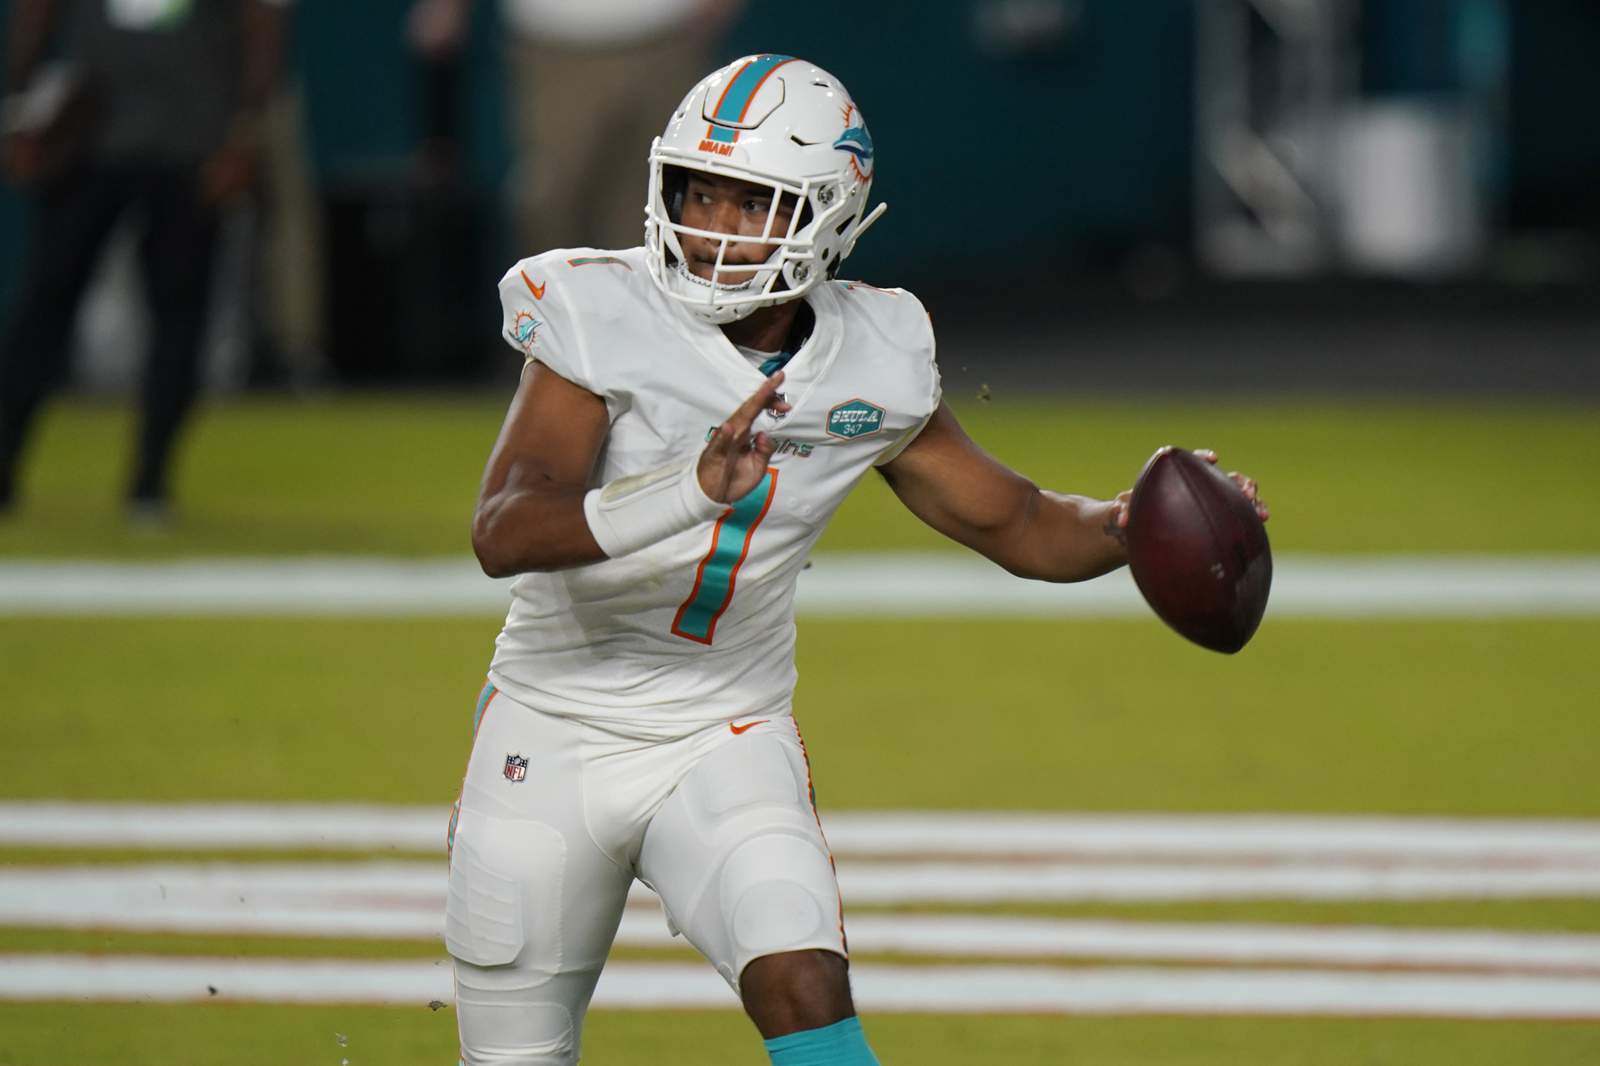 Flores confirms that Tua Tagovailoa will start at quarterback for the Dolphins